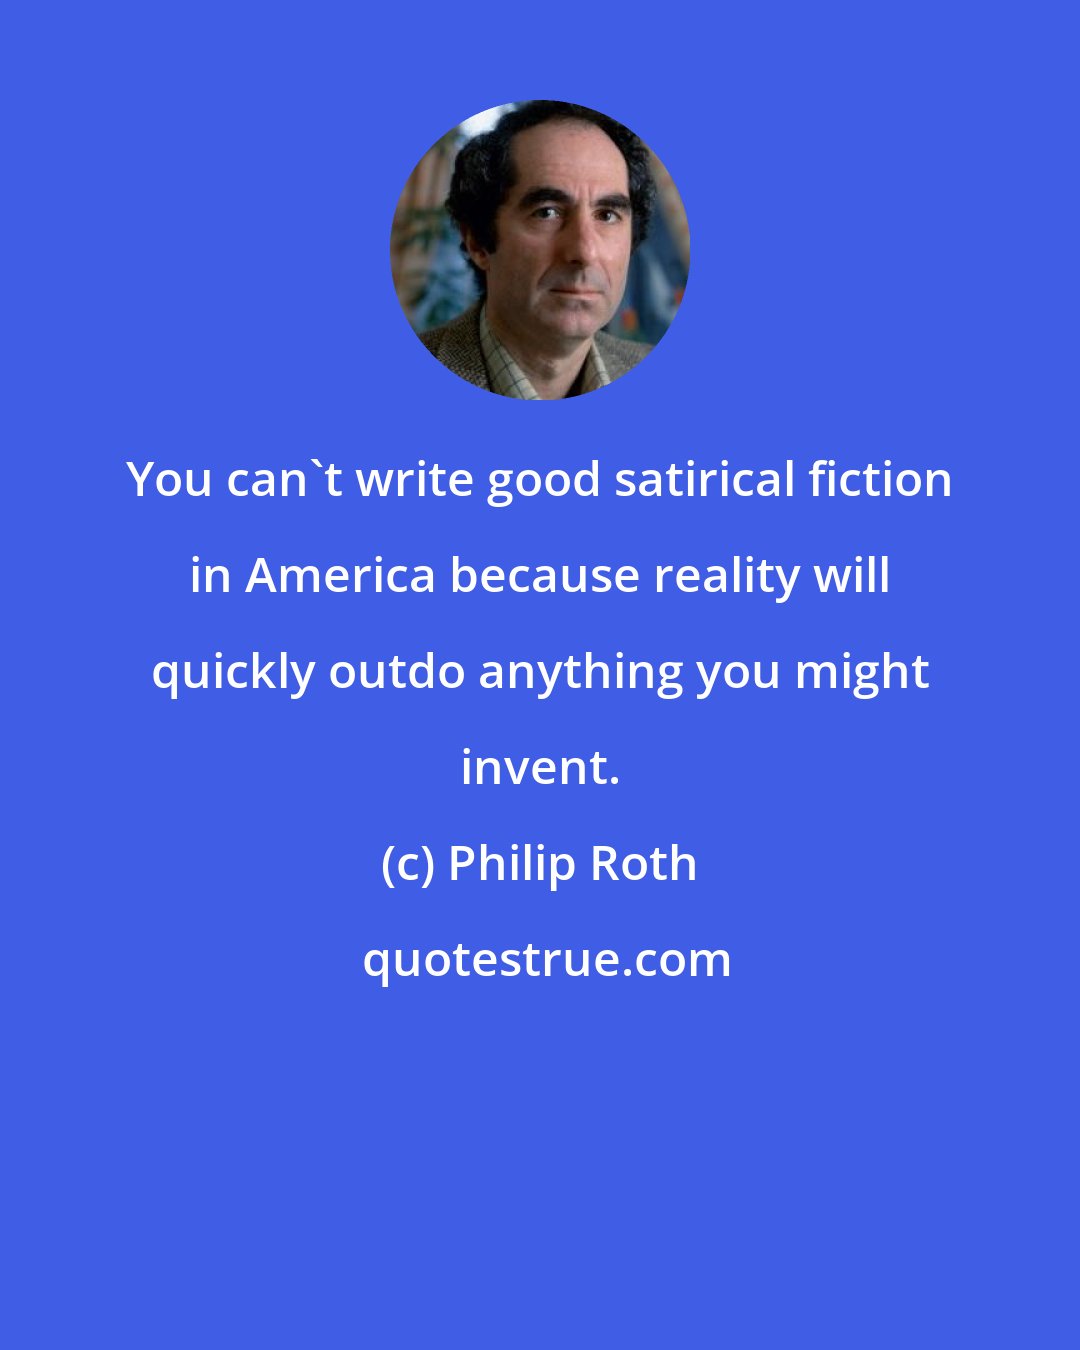 Philip Roth: You can't write good satirical fiction in America because reality will quickly outdo anything you might invent.